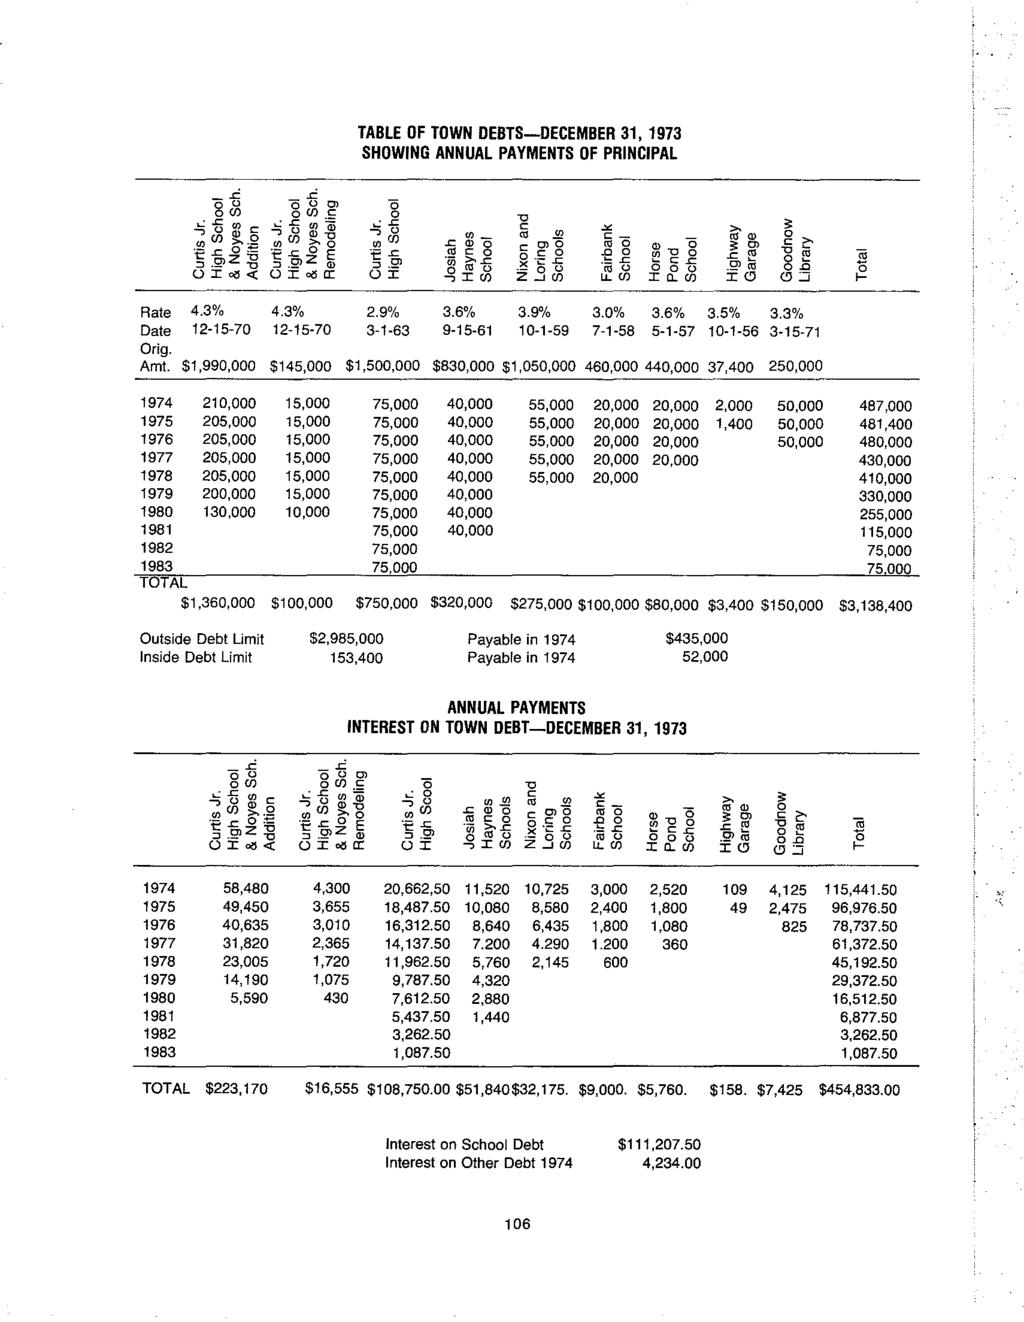 _.c.c TABLE OF TOWN DEBTS-DECEMBER 31, 1973 SHOWING ANNUAL PAYMENTS OF PRINCIPAL 0 " 0~ g 0 o(j) 0-0...: - Cl) c...:.c en Qi...:-a " c ;: -,uid-o >- ~(f) ~-Q ooro >-o ~(/).r= "'- "'!